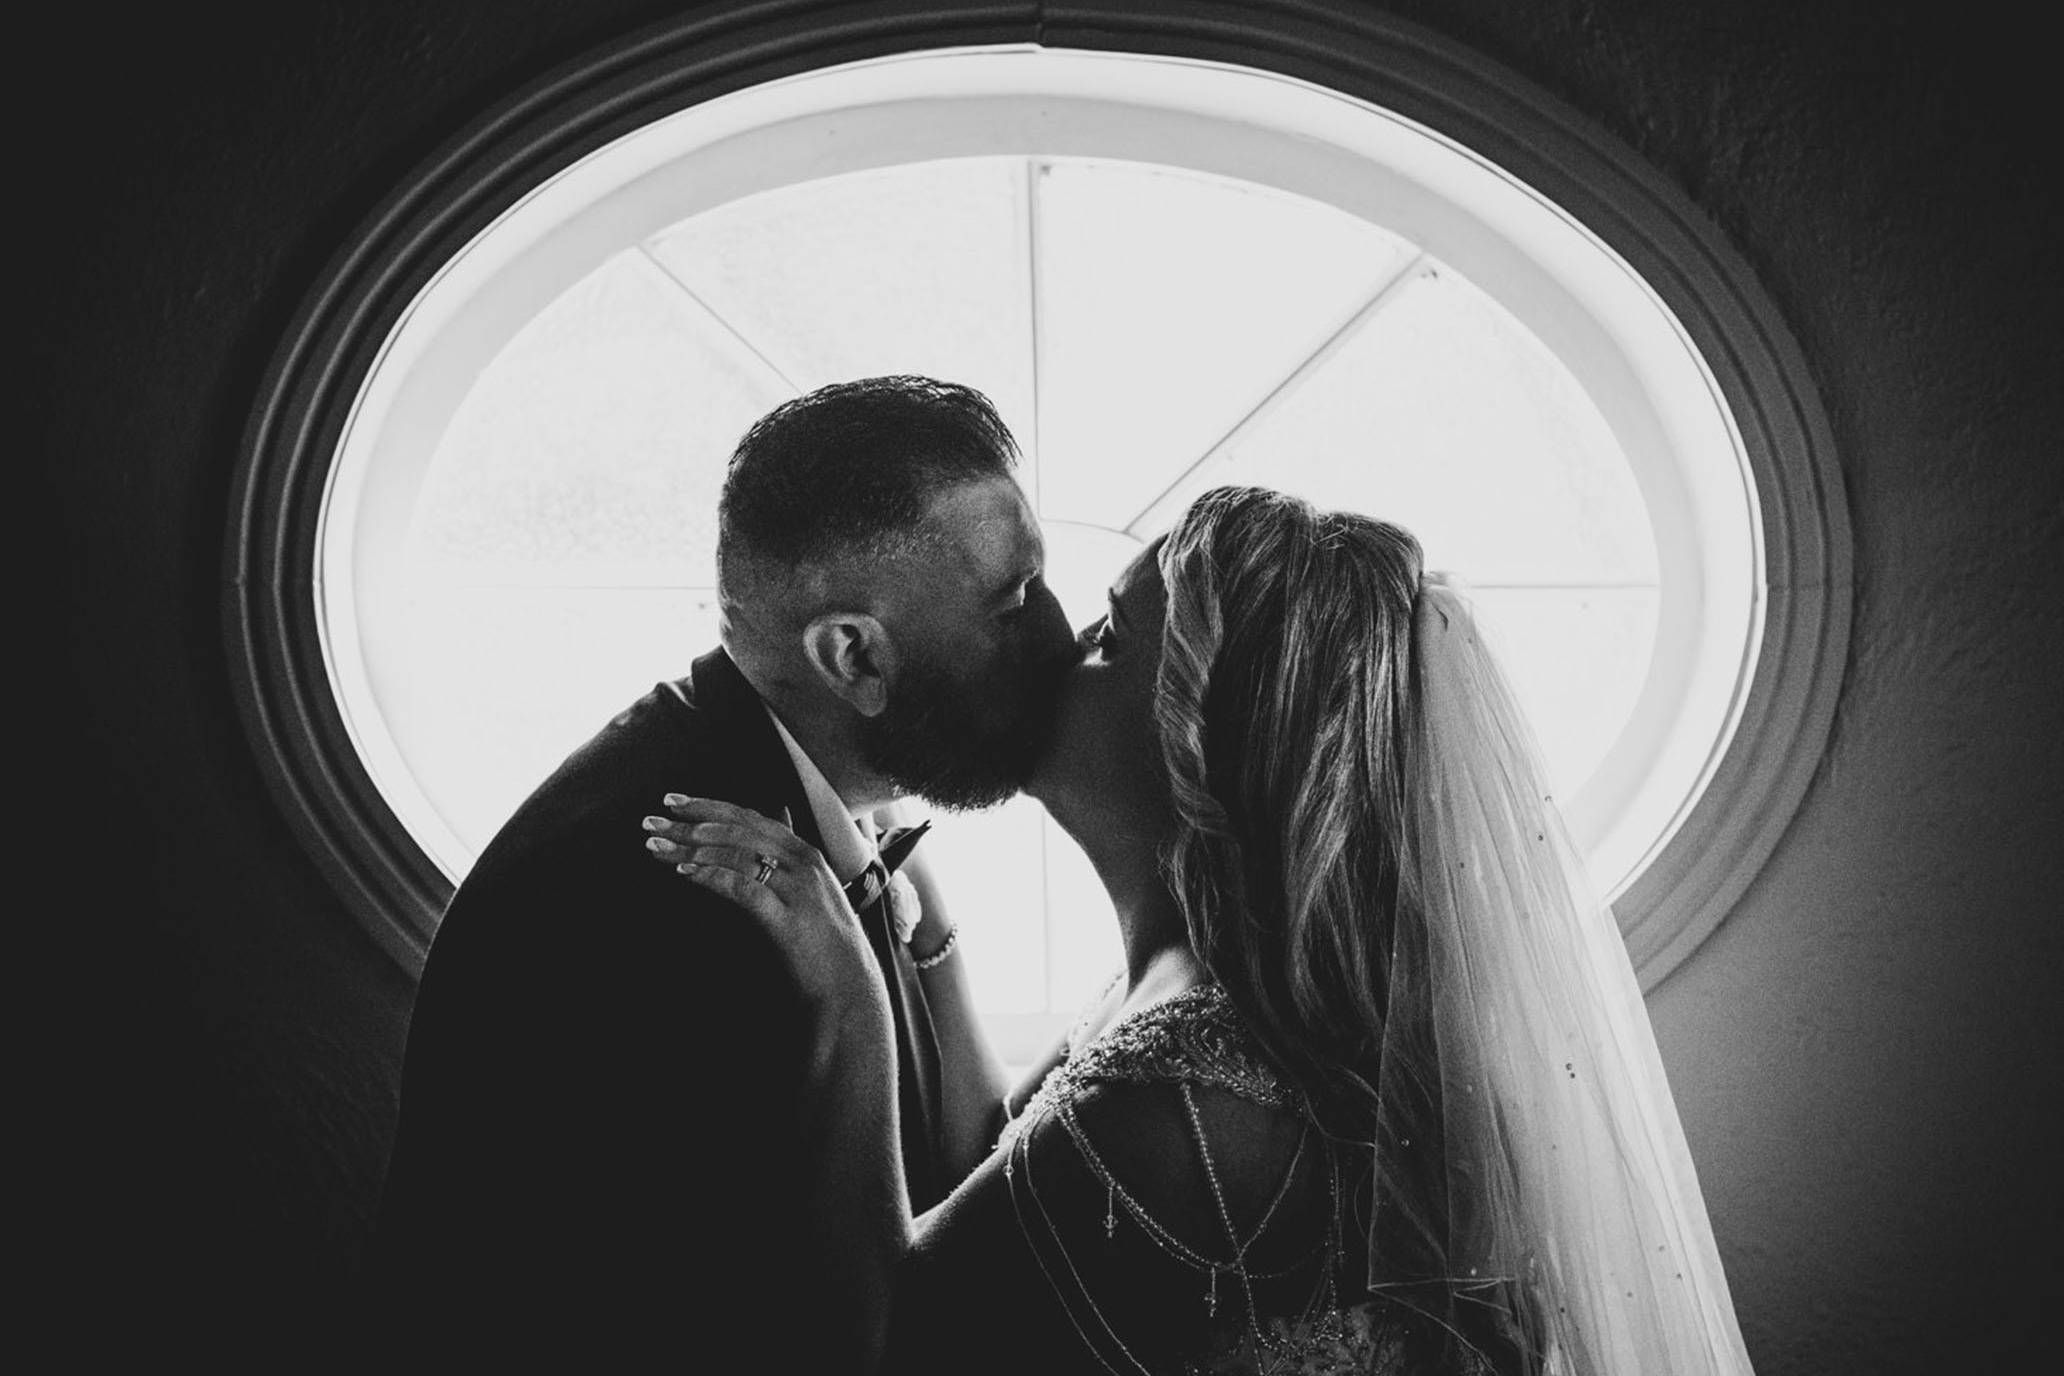 Couple kissing, silhouetted by the beautiful window in the background